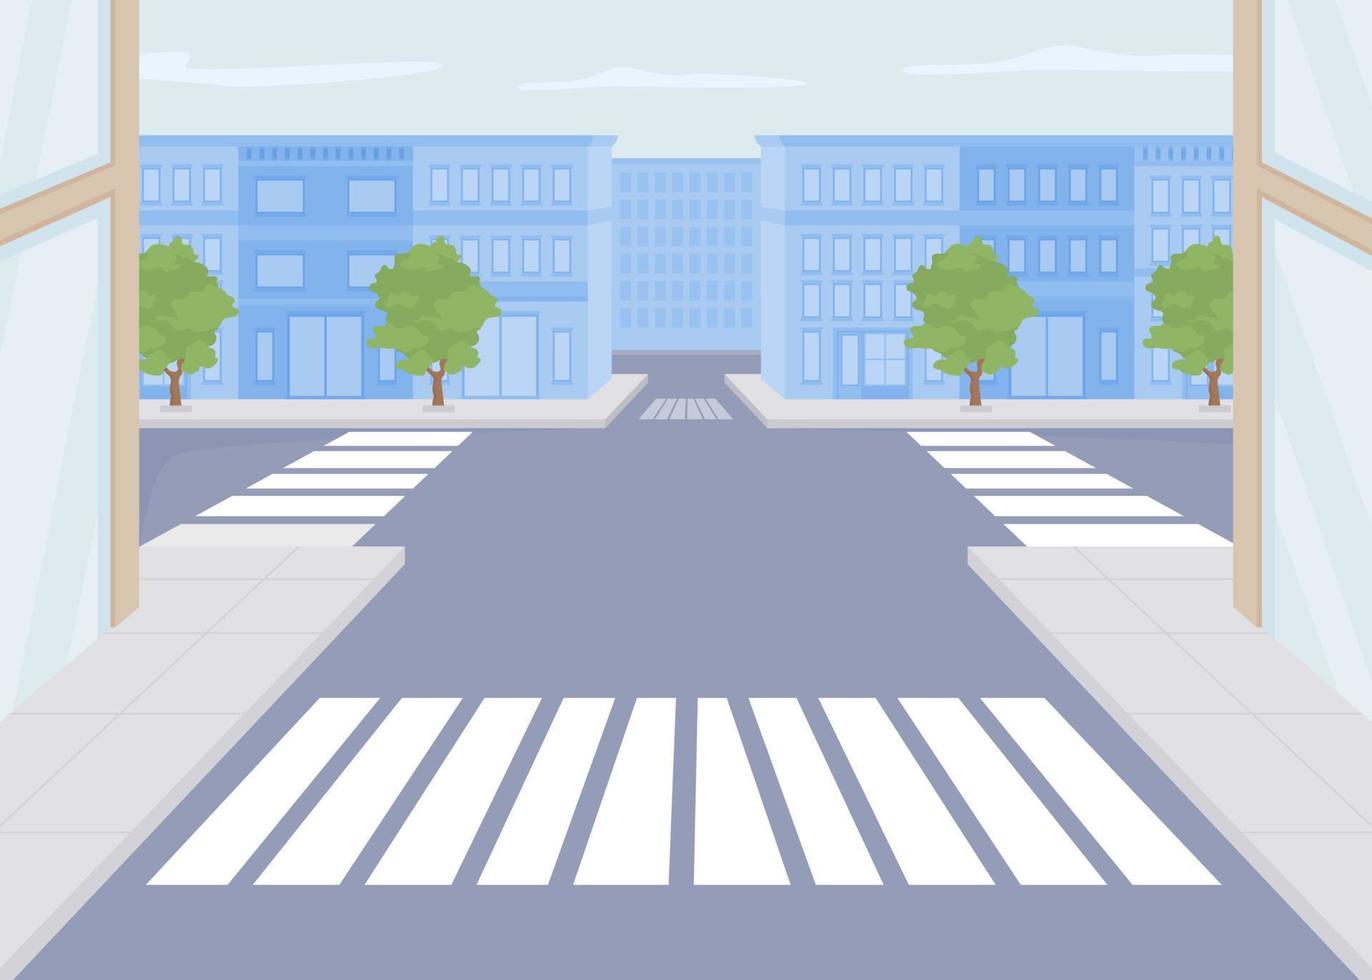 City crossroads flat color vector illustration. Urban infrastructure. Public place. Summertime town. Fully editable 2D simple cartoon cityscape with buildings and road on background